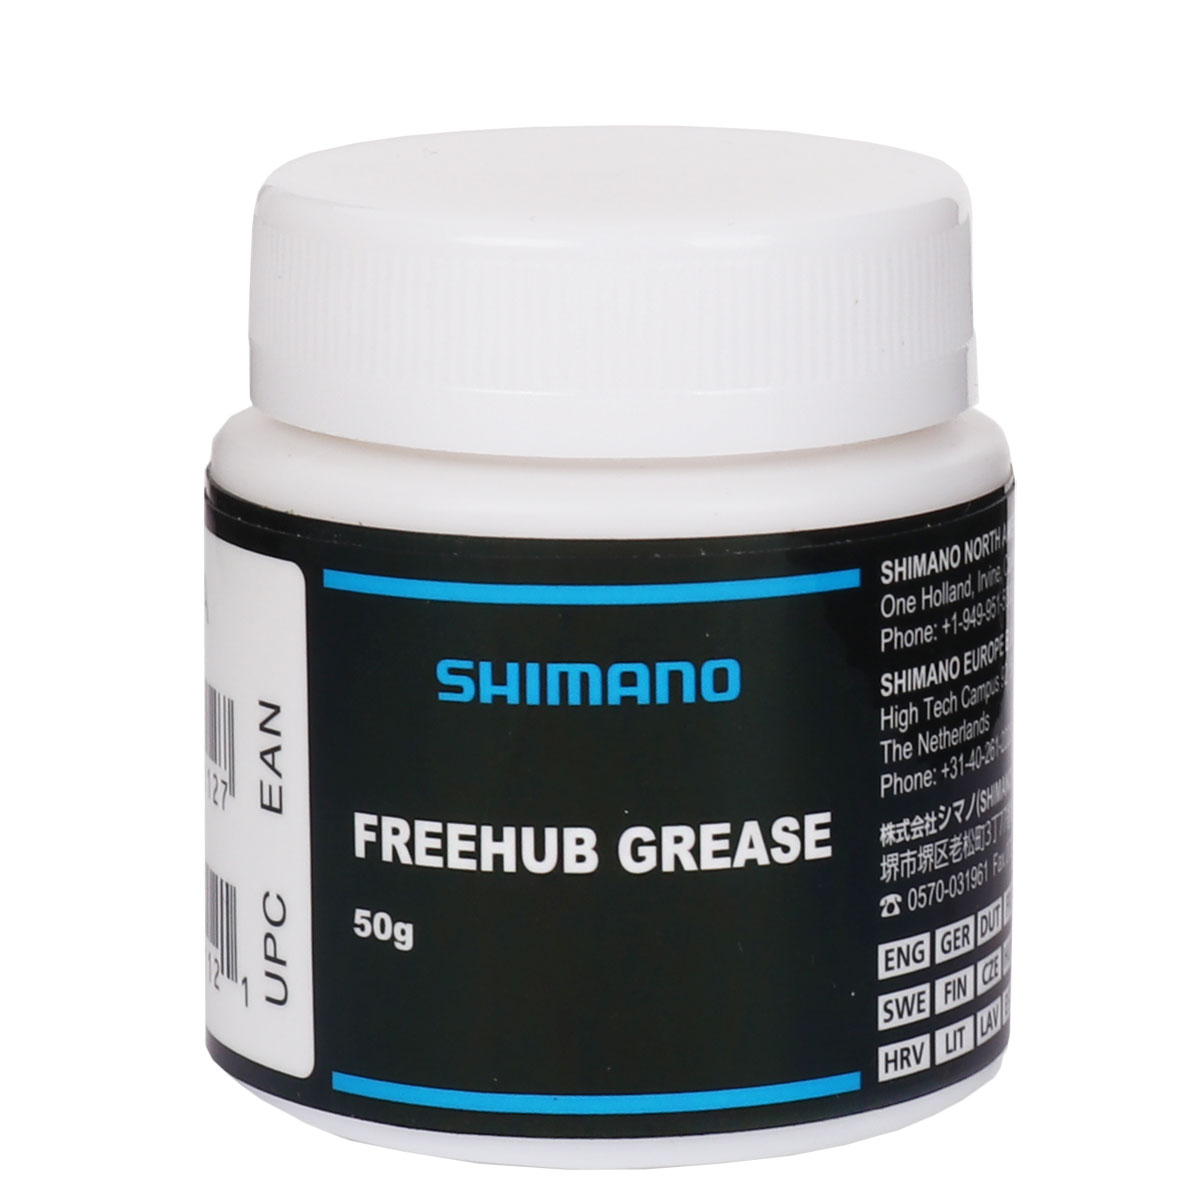 Image of Shimano Special Grease for Ratchet Freehubs - 50g